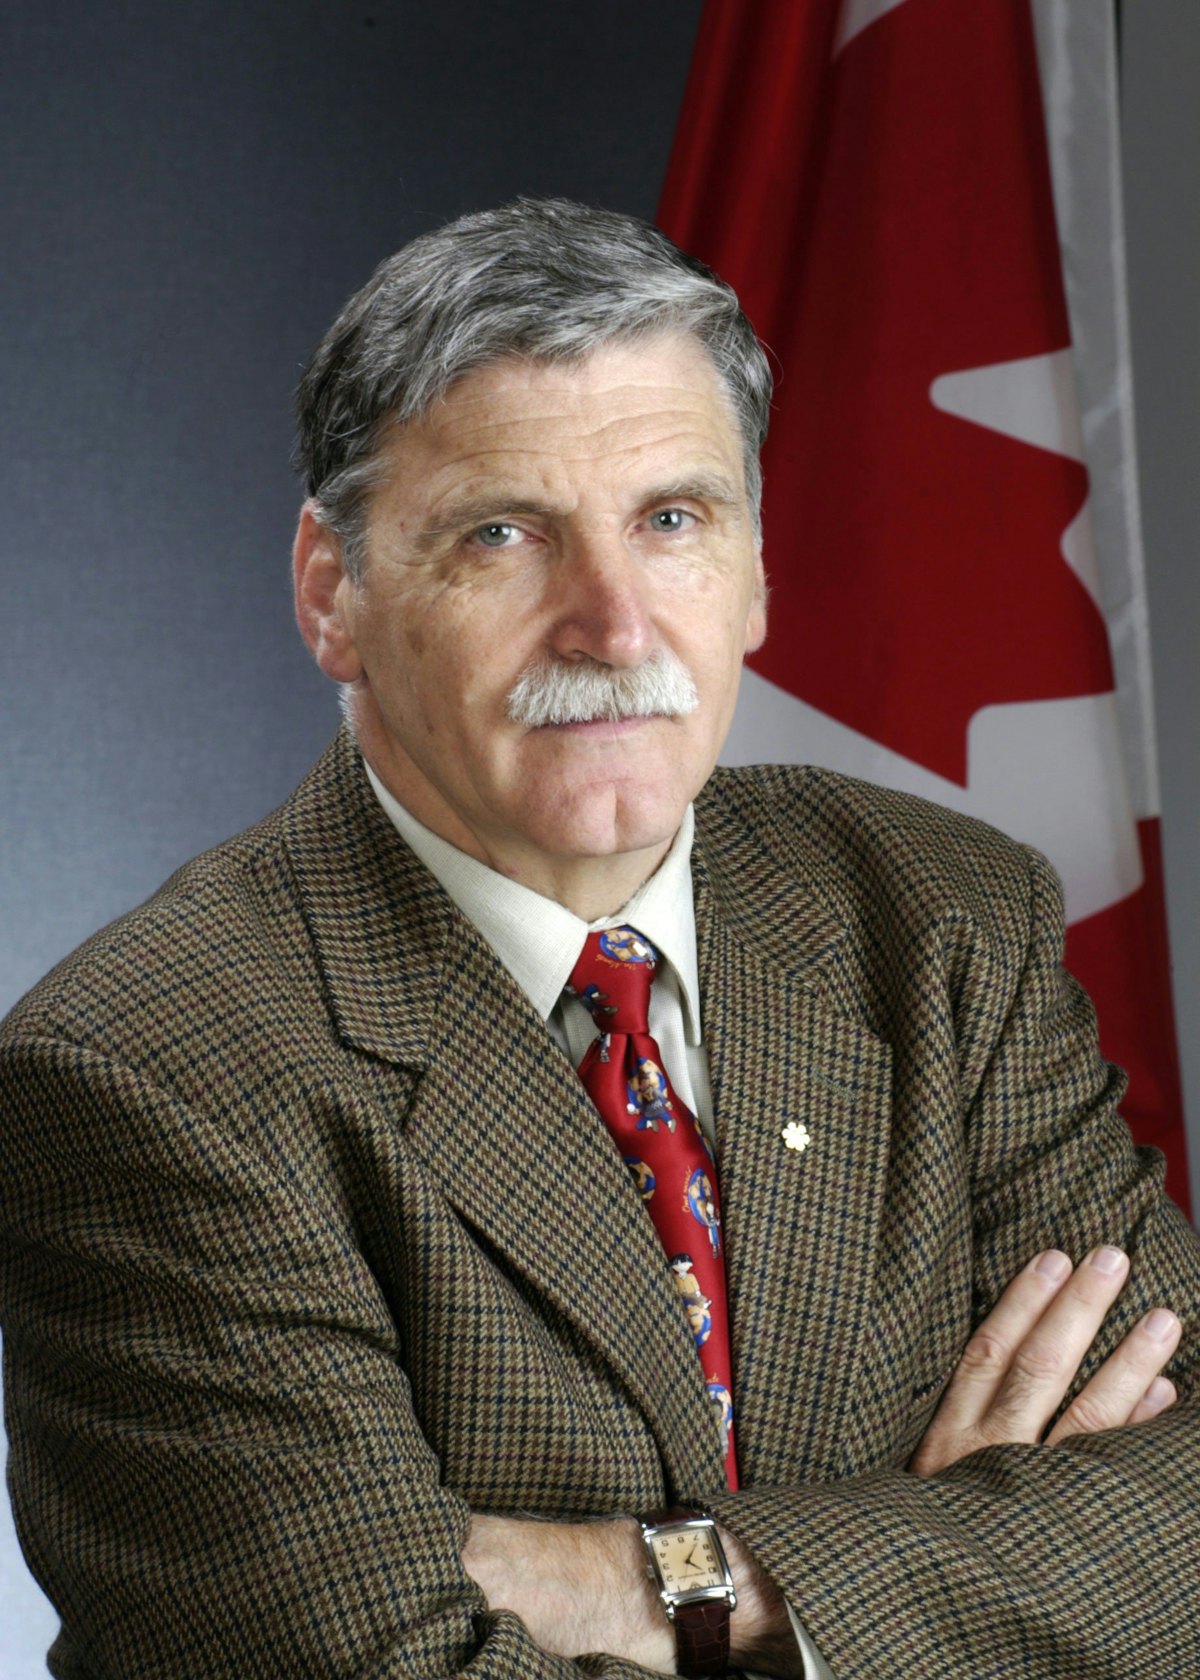 Canadian Senator Lieutenant-General Romeo Dallaire, who has called upon his government to address urgently Iran's "intent to destroy, in whole or in part, the Baha'i community as a separate religious entity."